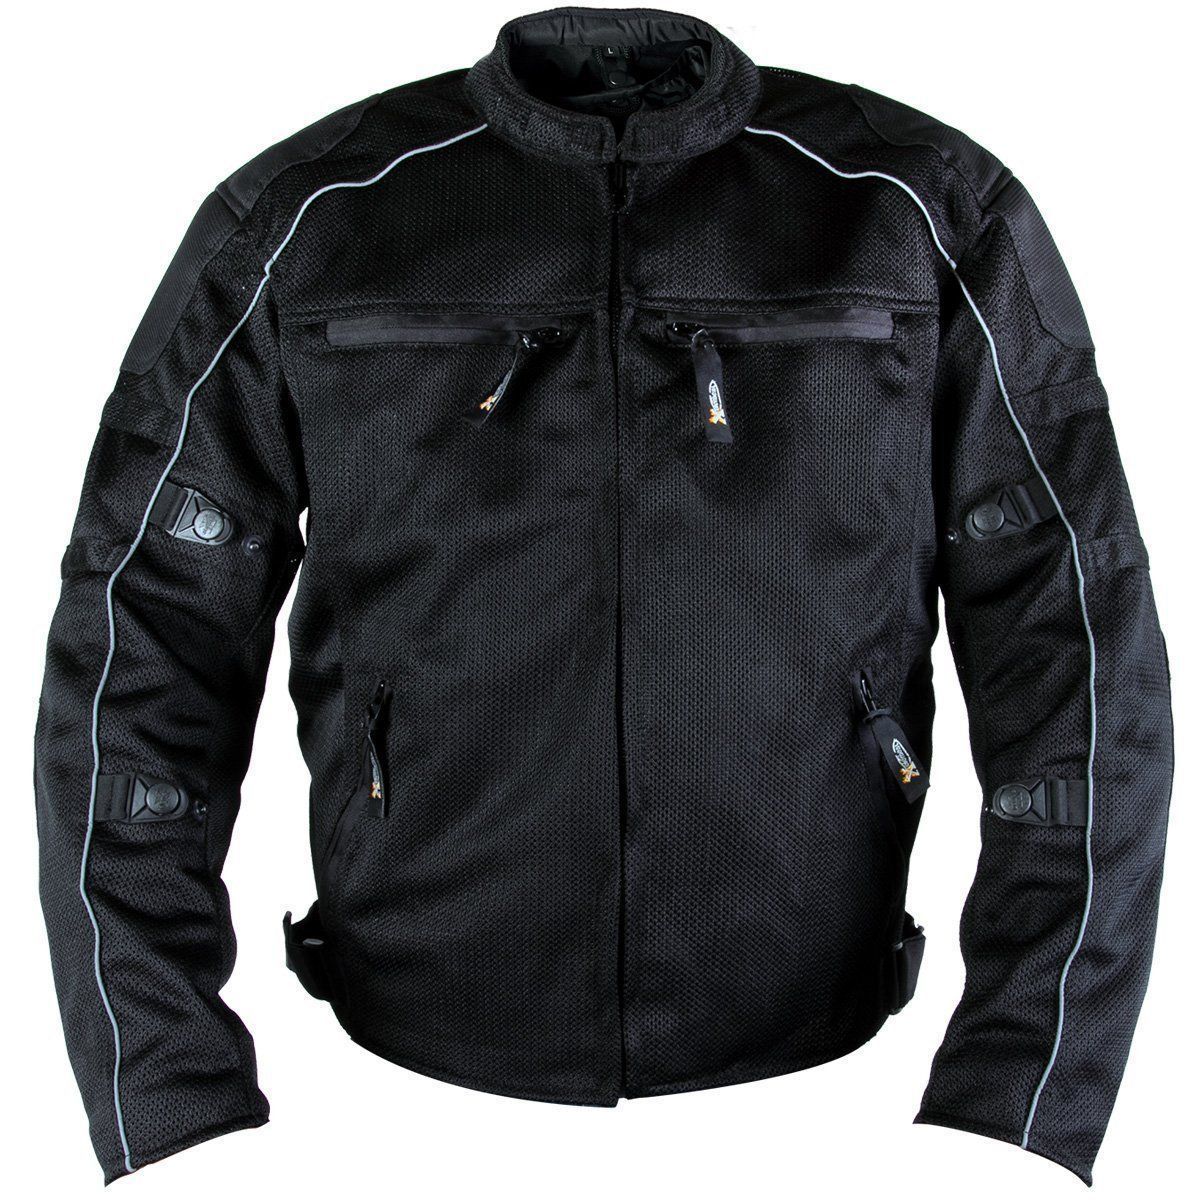 Xelement XS6557 Men's 'Troubled' Black All-Weather Mesh Jacket with X-Armor Protection